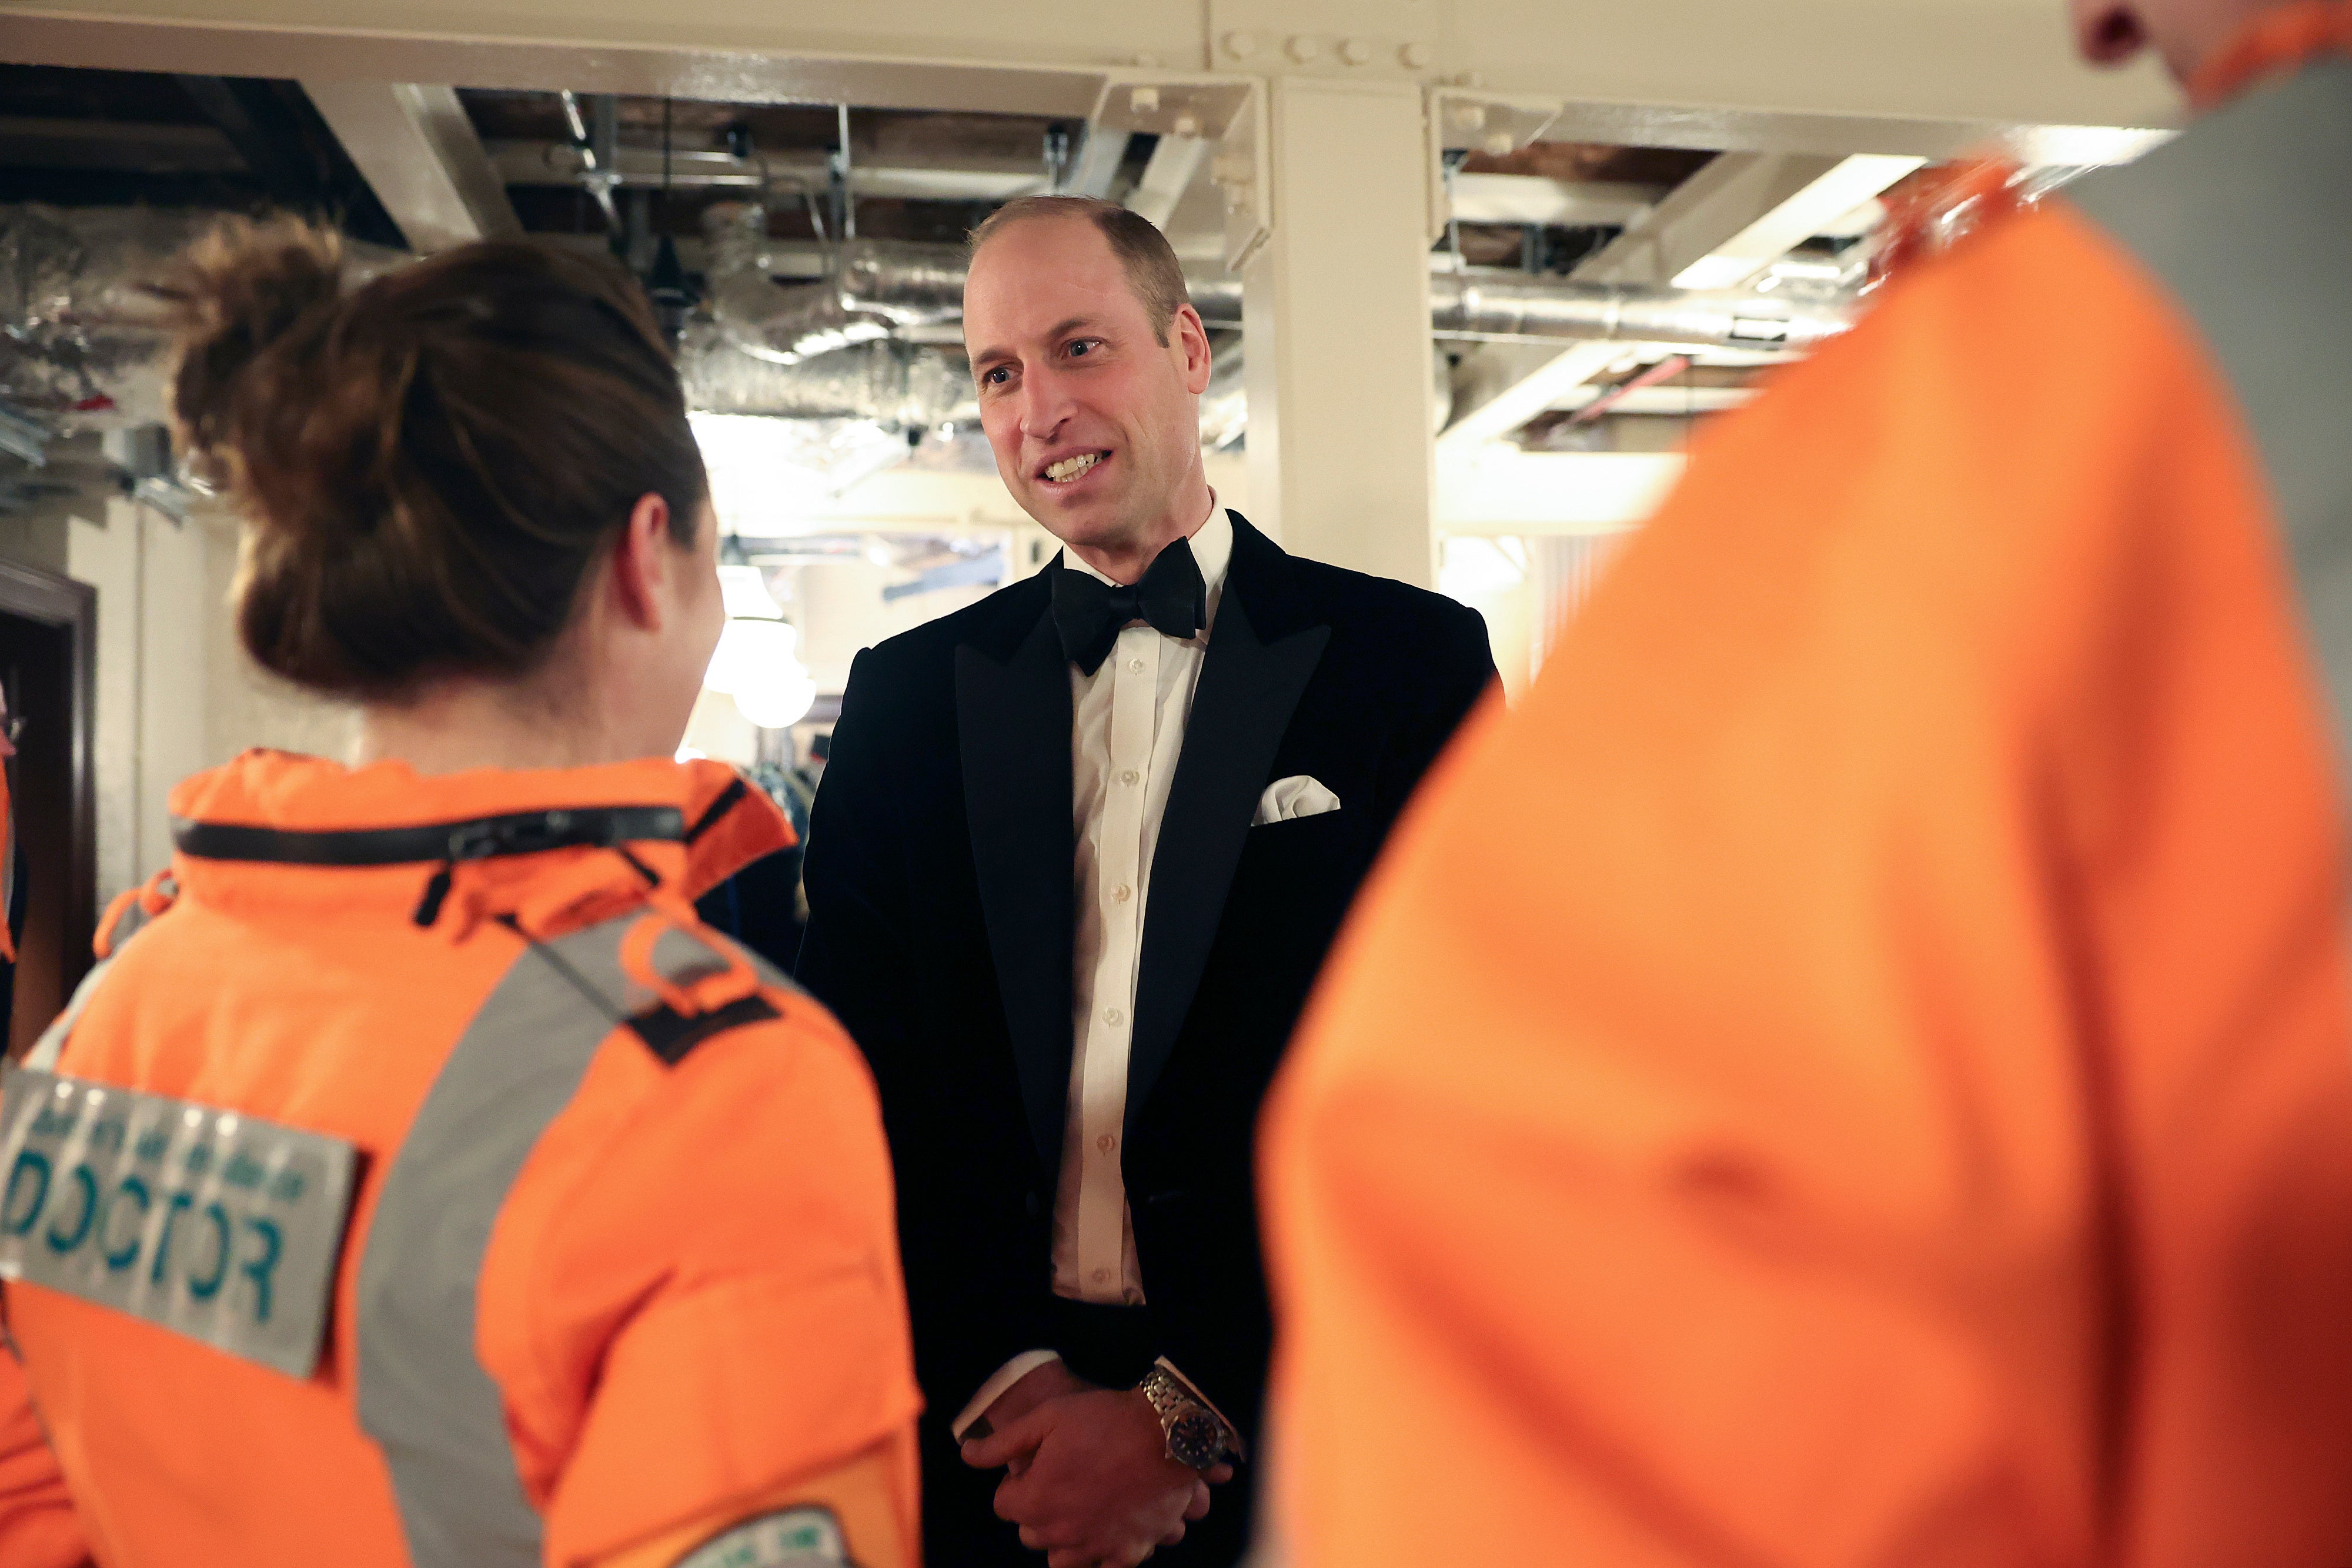 Prince William speaks with London Air Ambulance pilots during the event on Wednesday evening